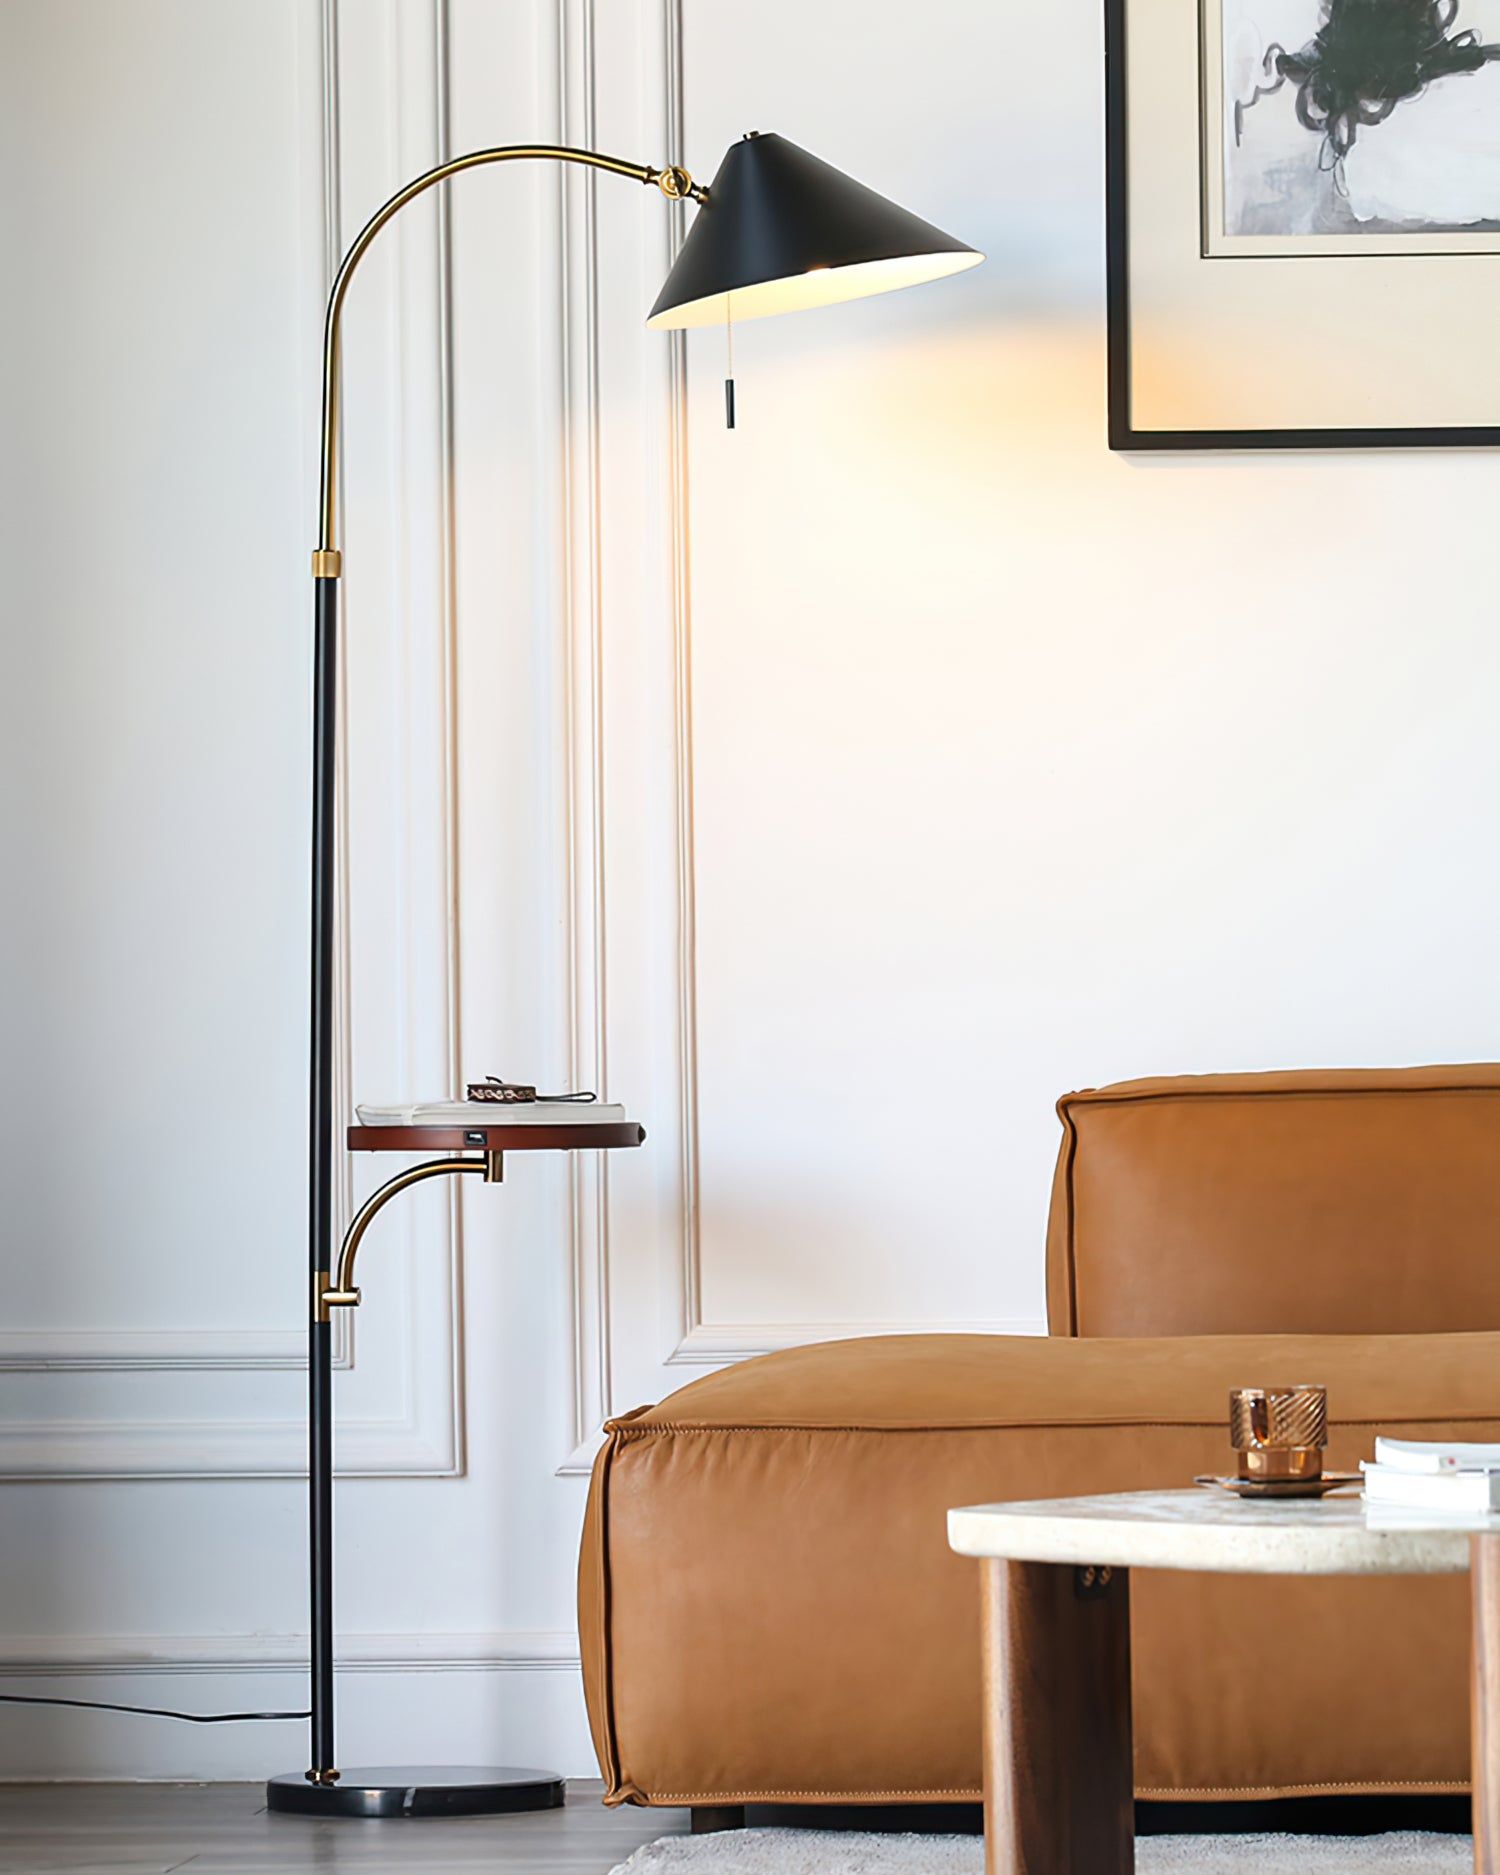 Dimmable Floor Lamp Illuminate Your Space with Adjustable Lighting Options